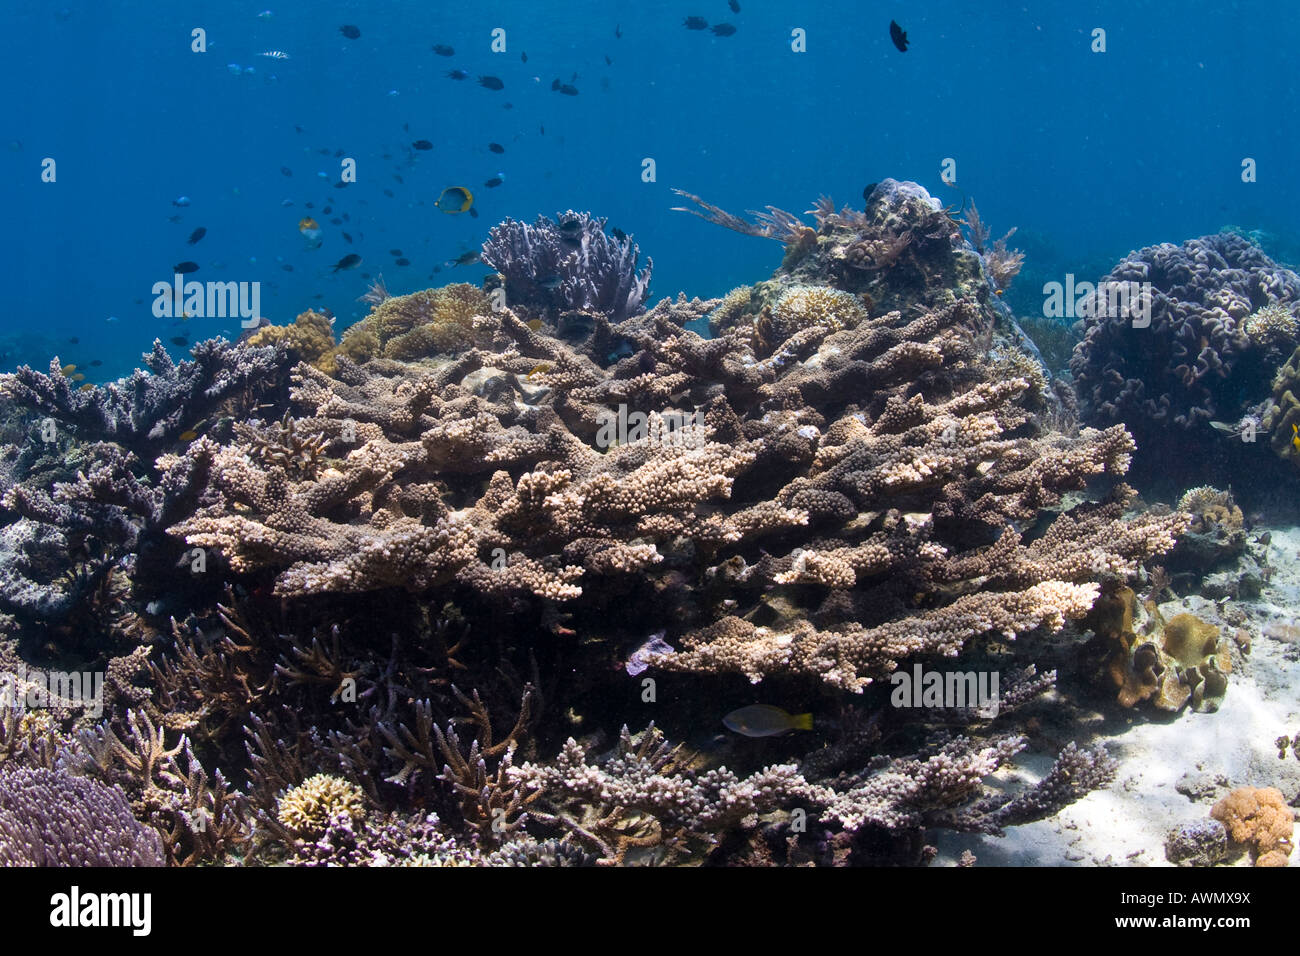 Coral reef in the underwater national park of Bunaken, Sulawesi, Indonesia. Stock Photo